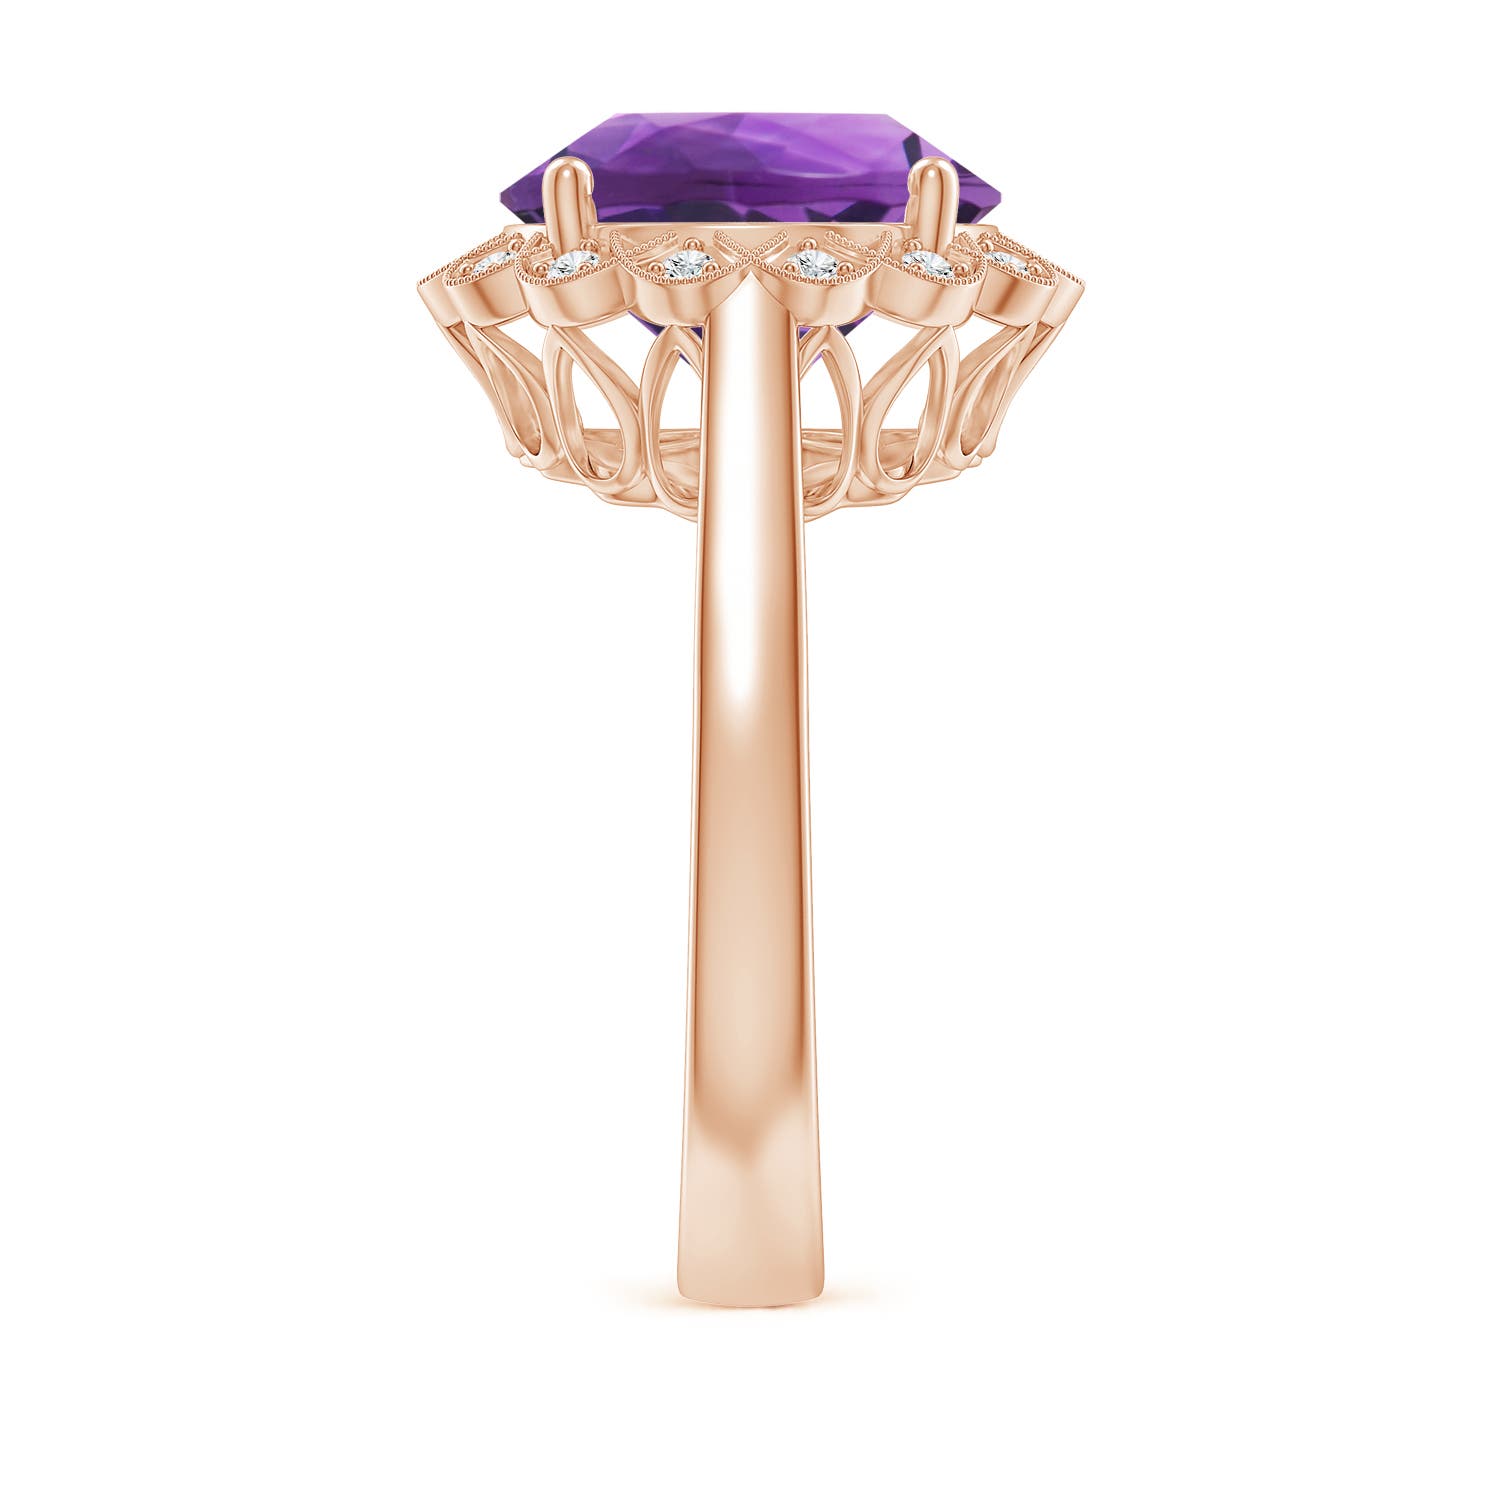 AAA- Amethyst / 4.86 CT / 14 KT Rose Gold